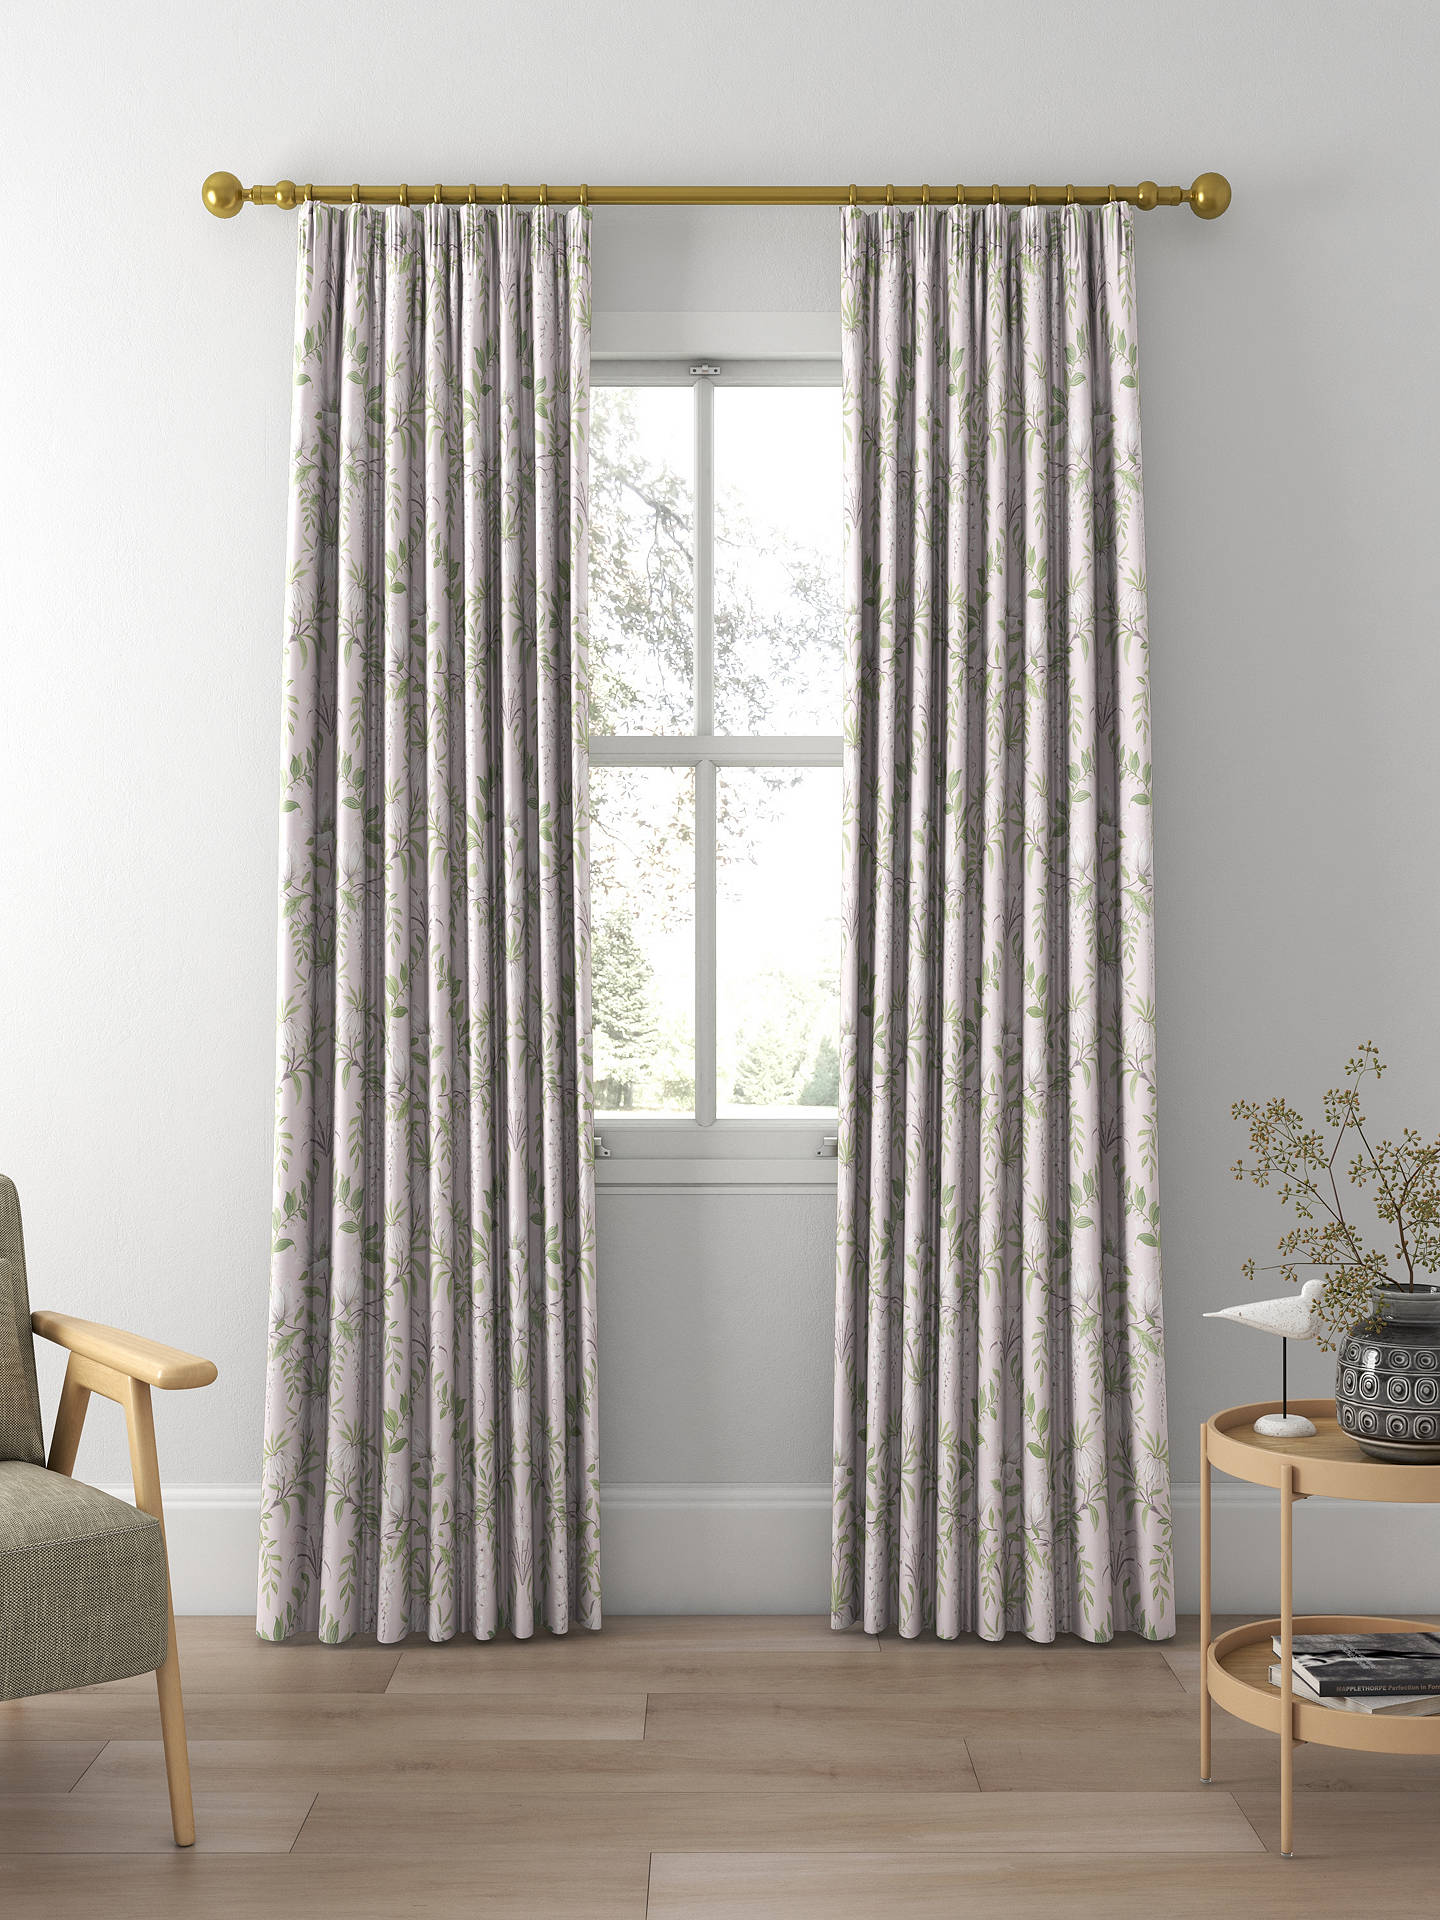 Laura Ashley Parterre Made to Measure Curtains, Blush